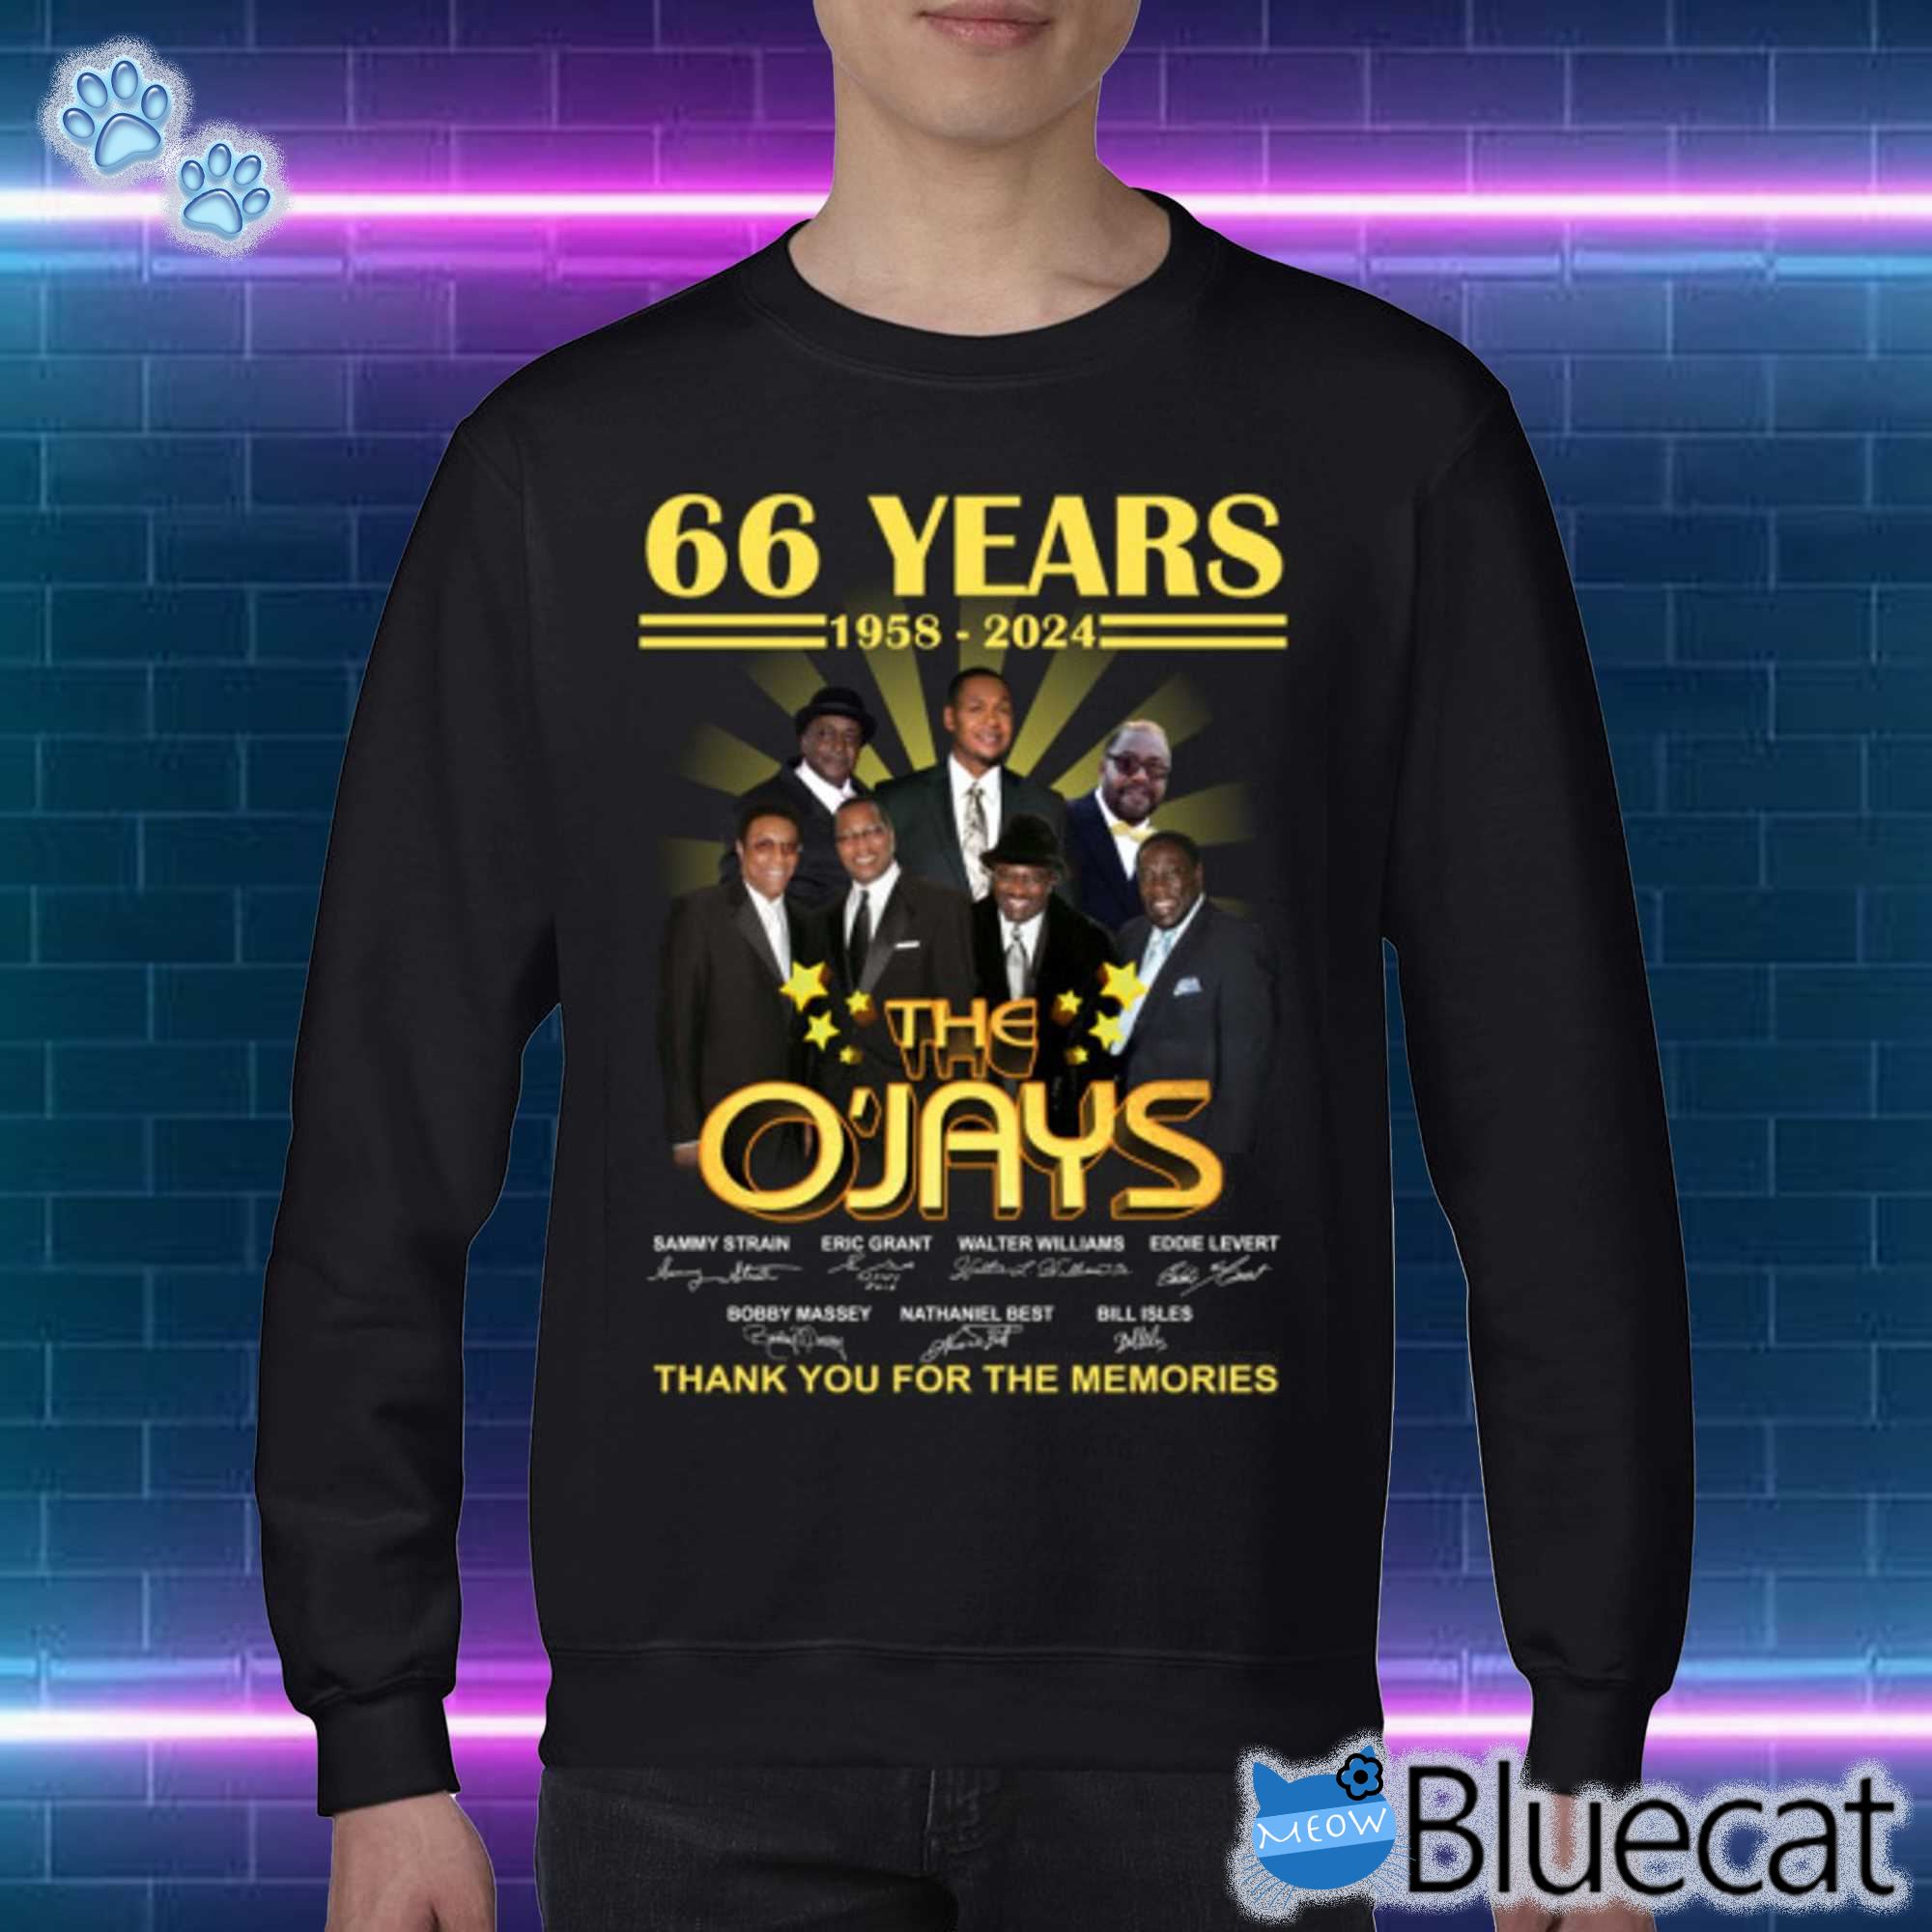 66 Years 1958 – 2024 The Ojays Thank You For The Memories T-shirt Sweatshirt 